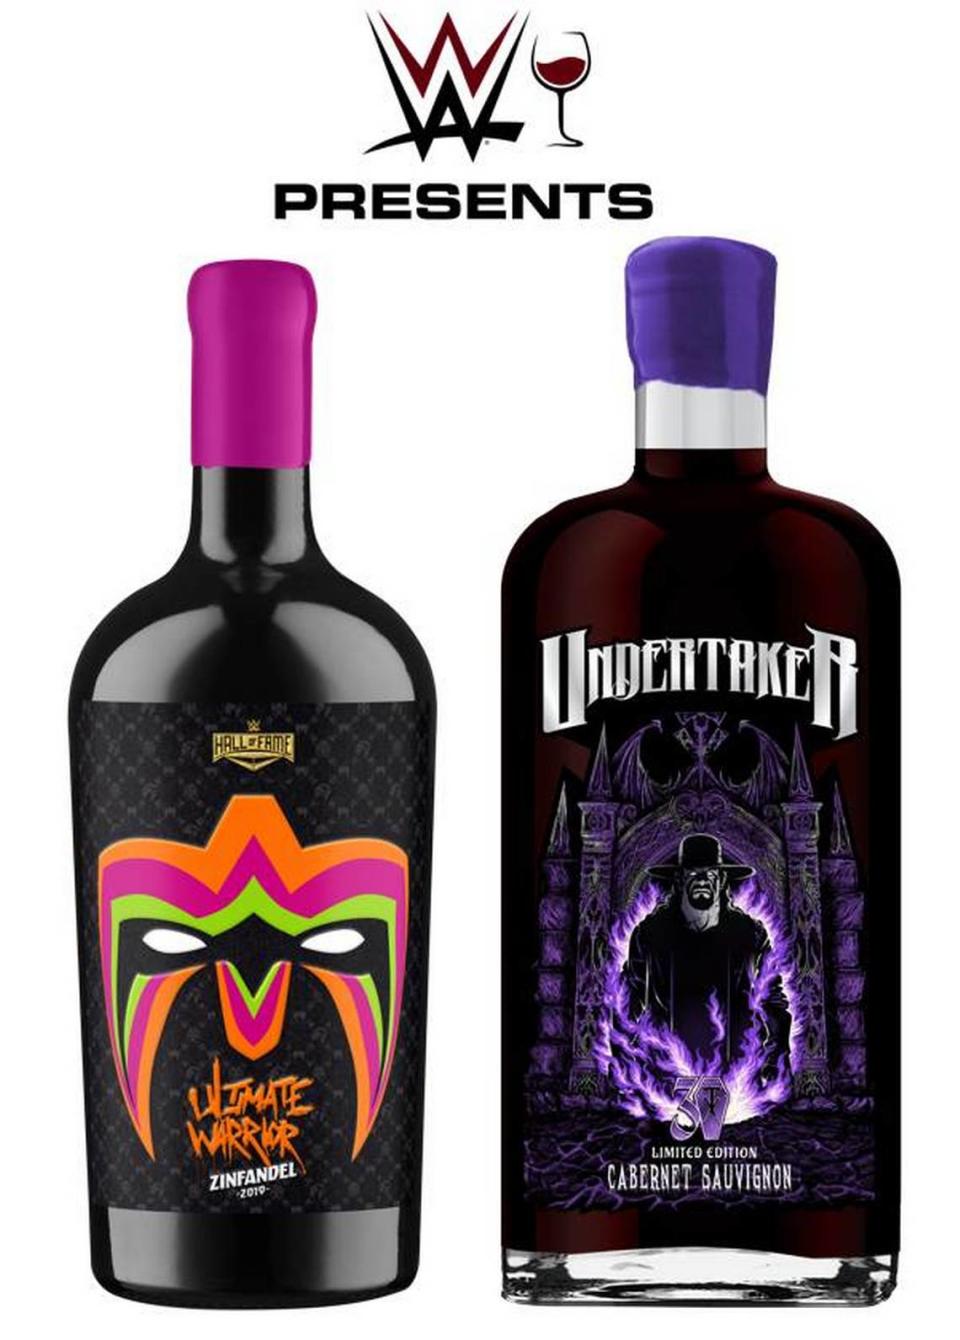 Wines That Rock joined forces with WWE for special Ultimate Warrior and Underatker inspired wines.